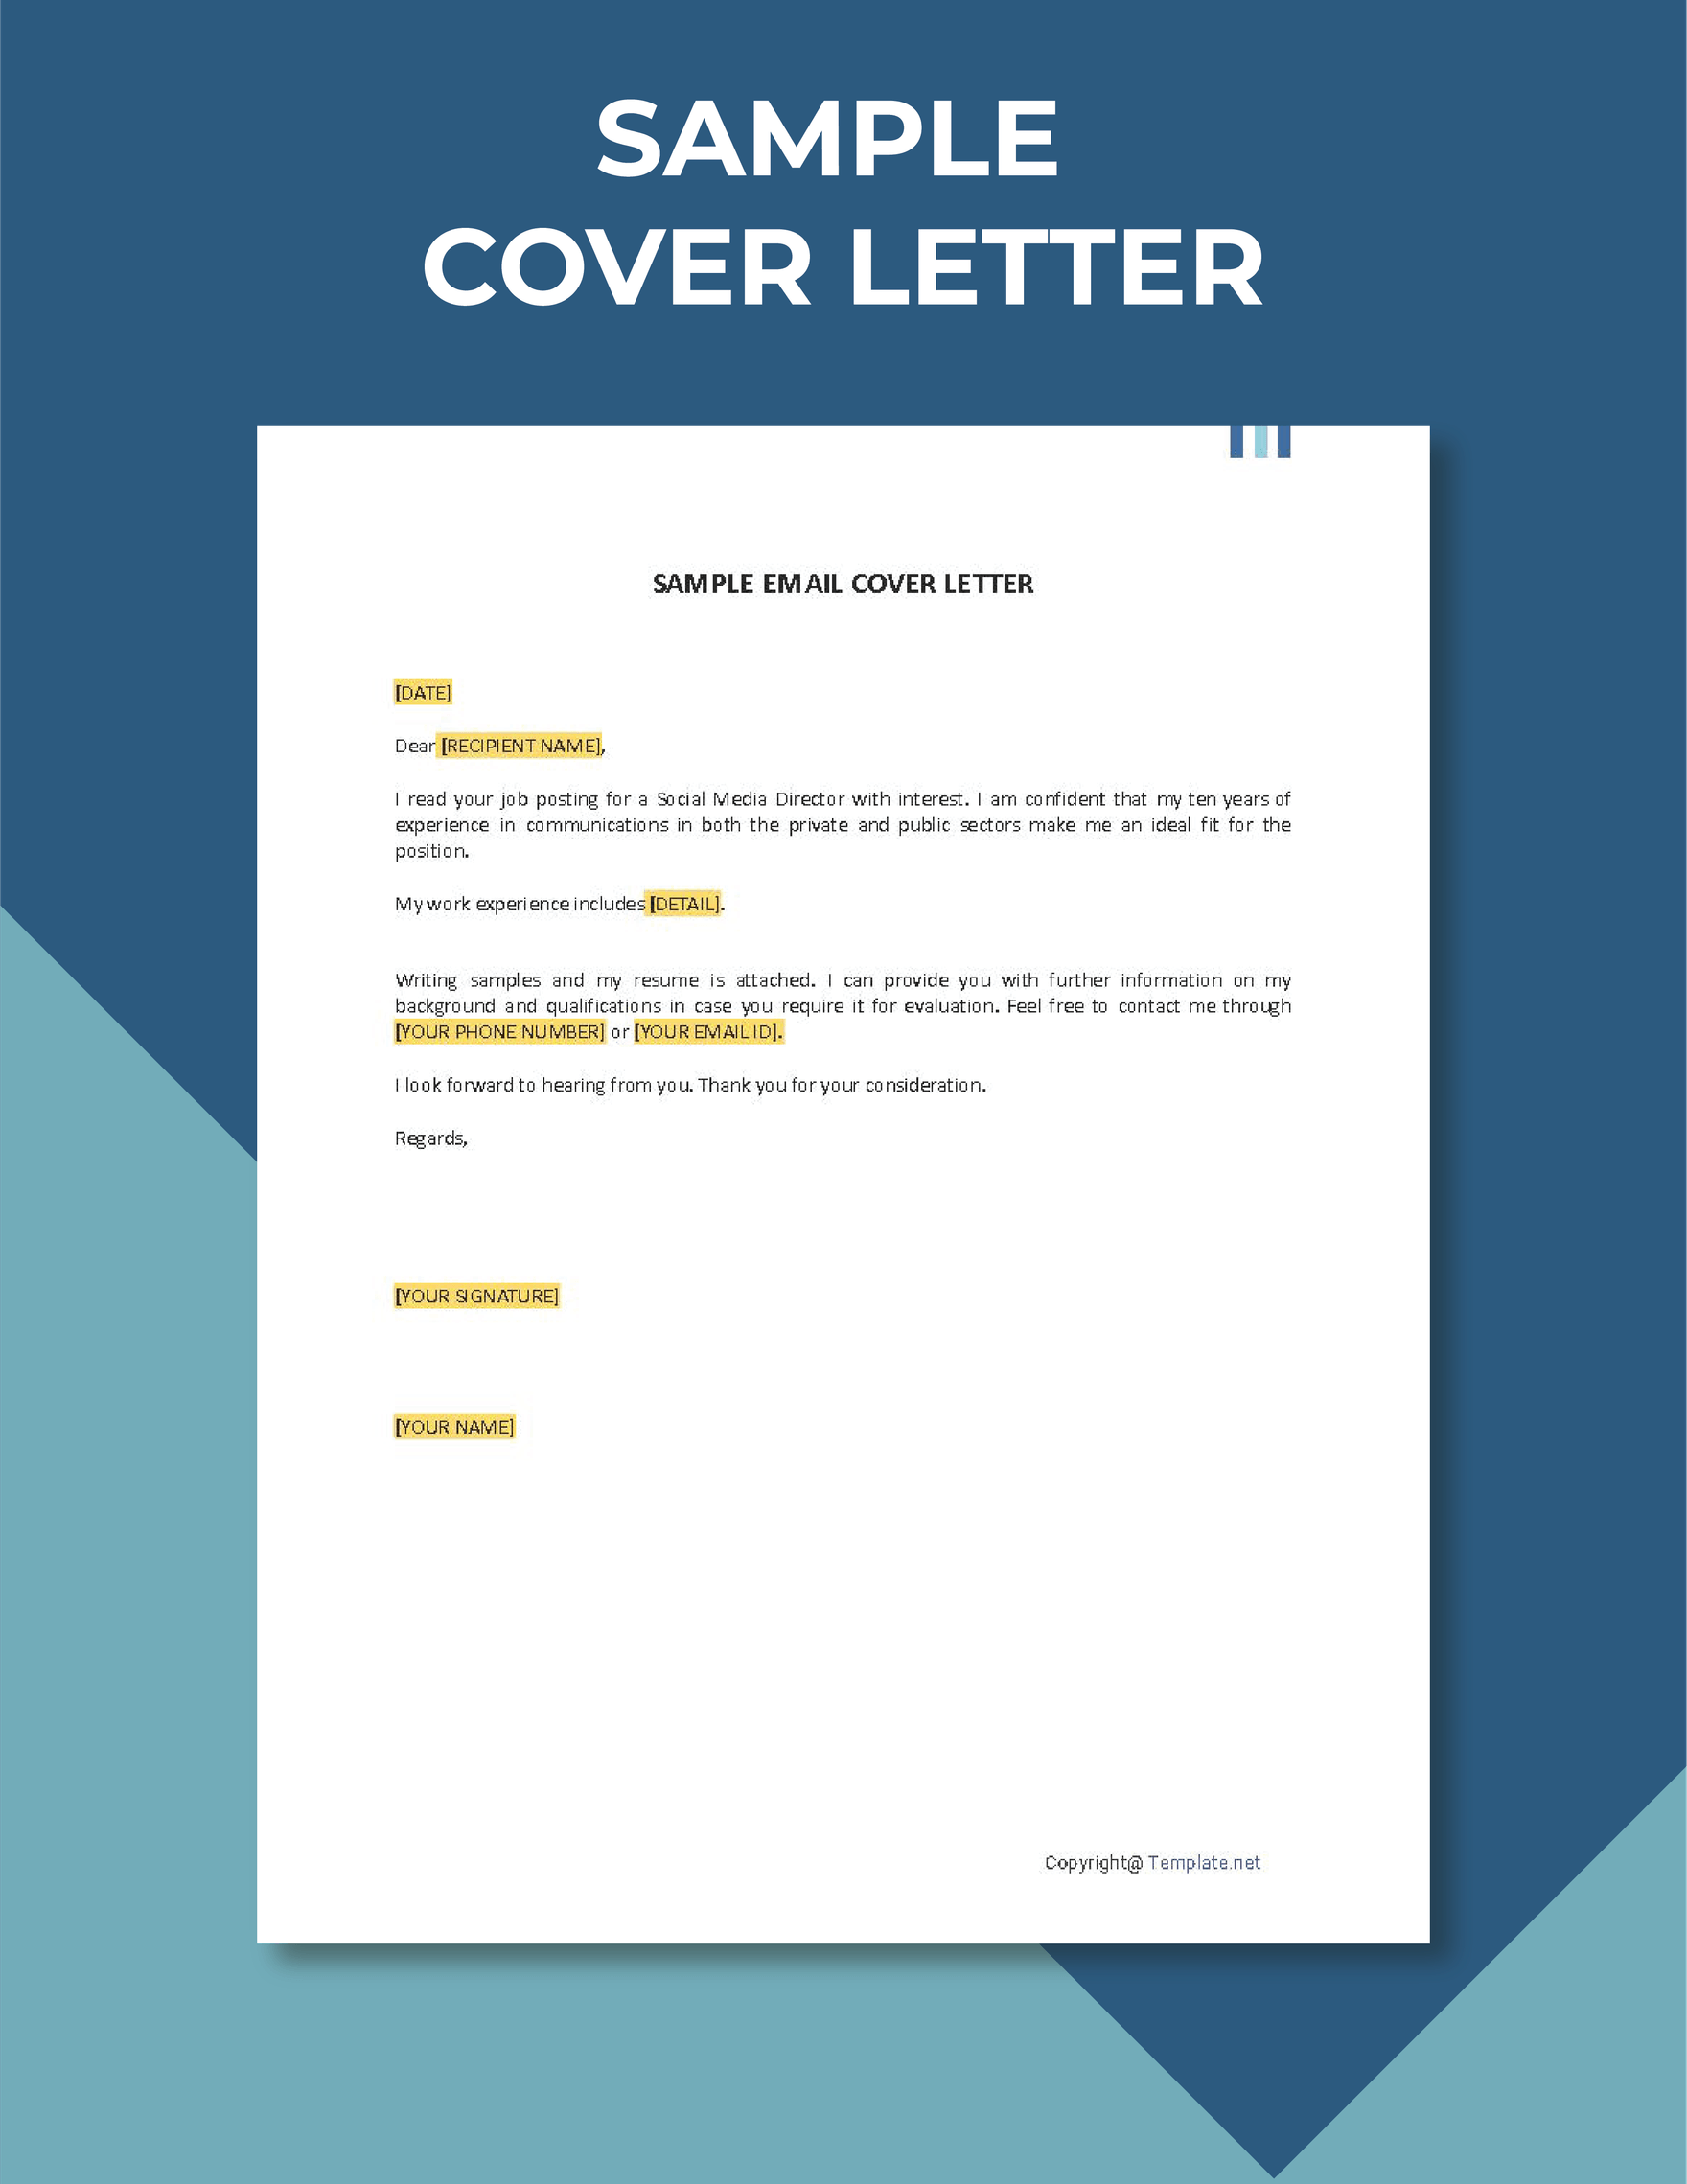 Sample Email Cover Letter in Word, Google Docs, PDF, Apple Pages, Outlook